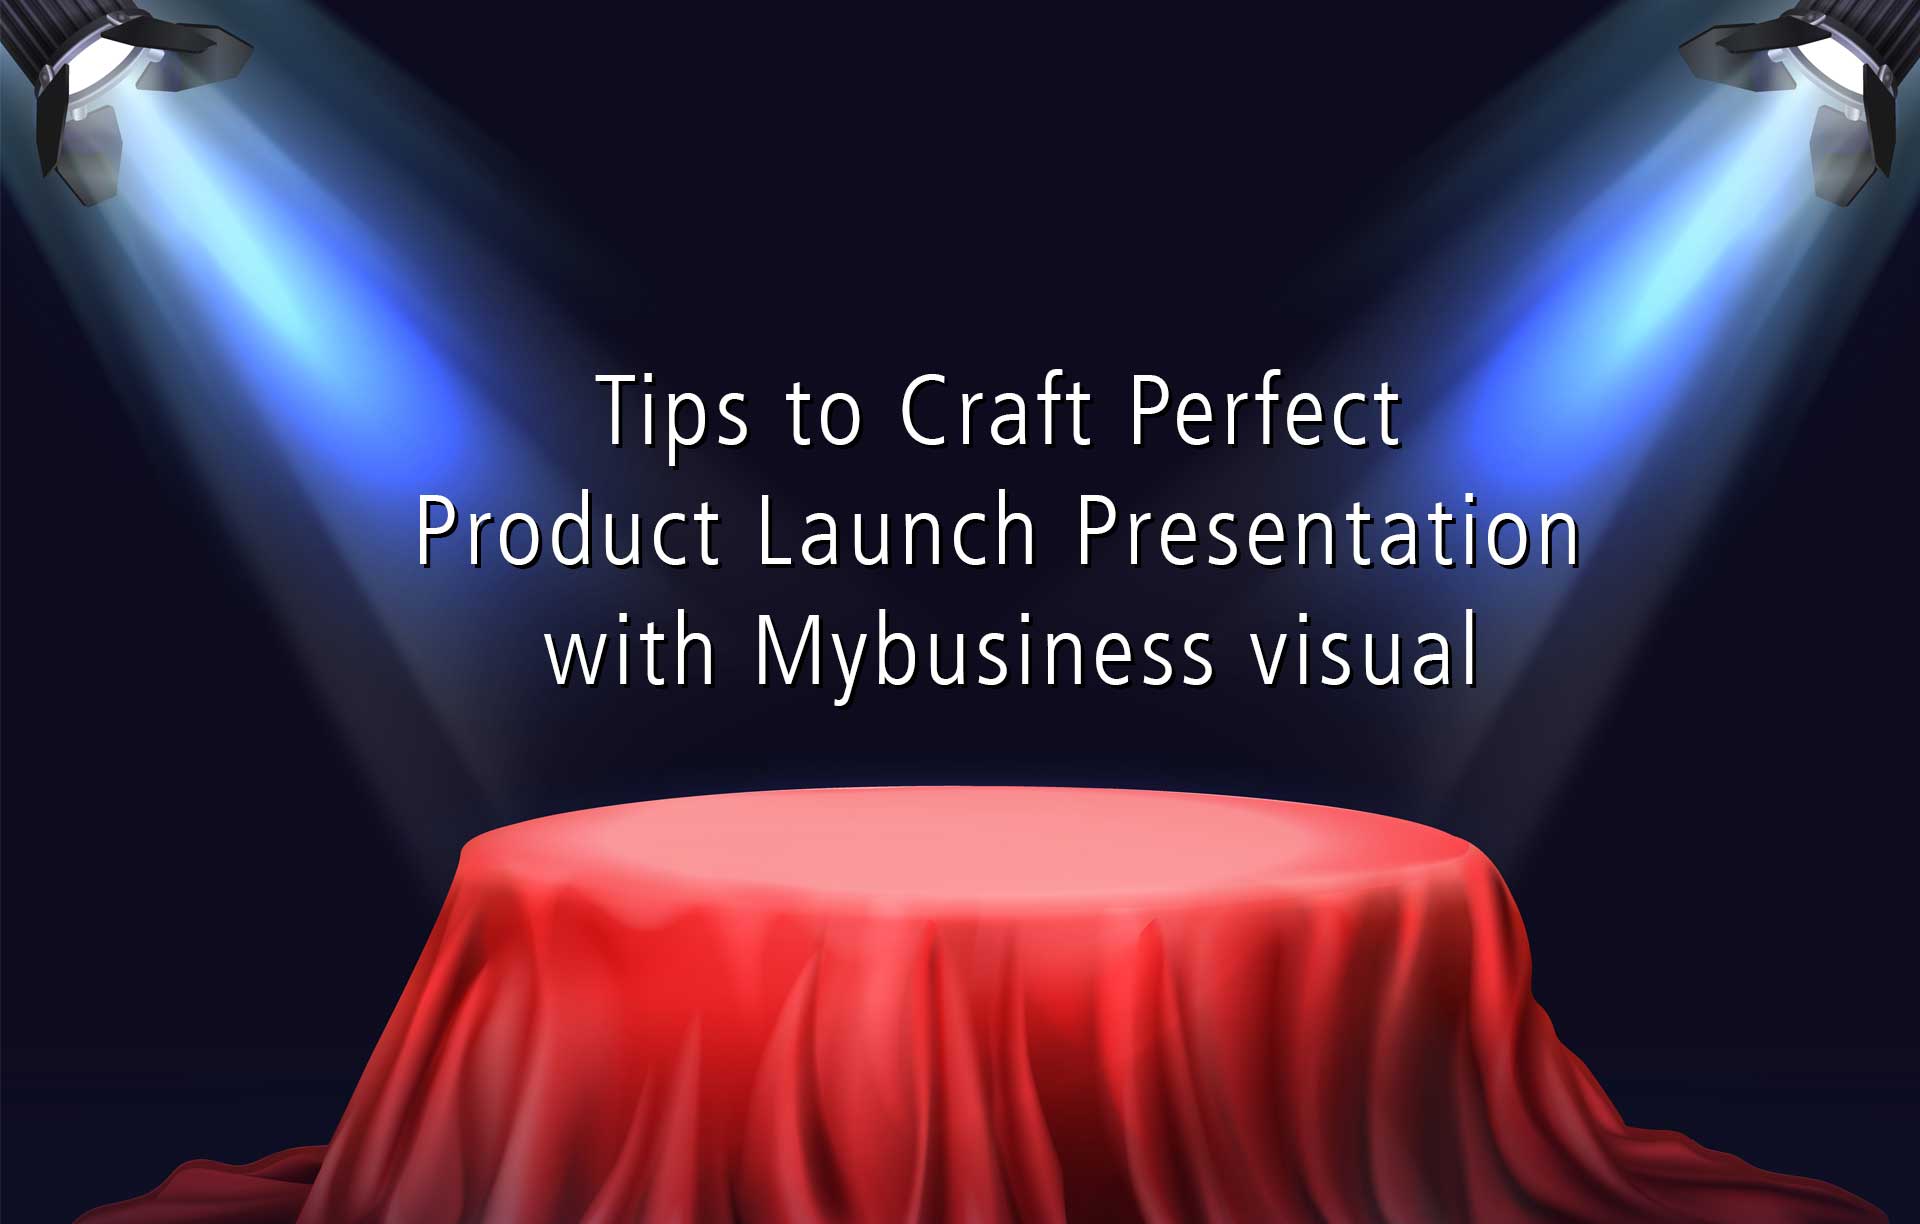 Tips to Craft Perfect Product Launch Presentation with Mybusiness visual